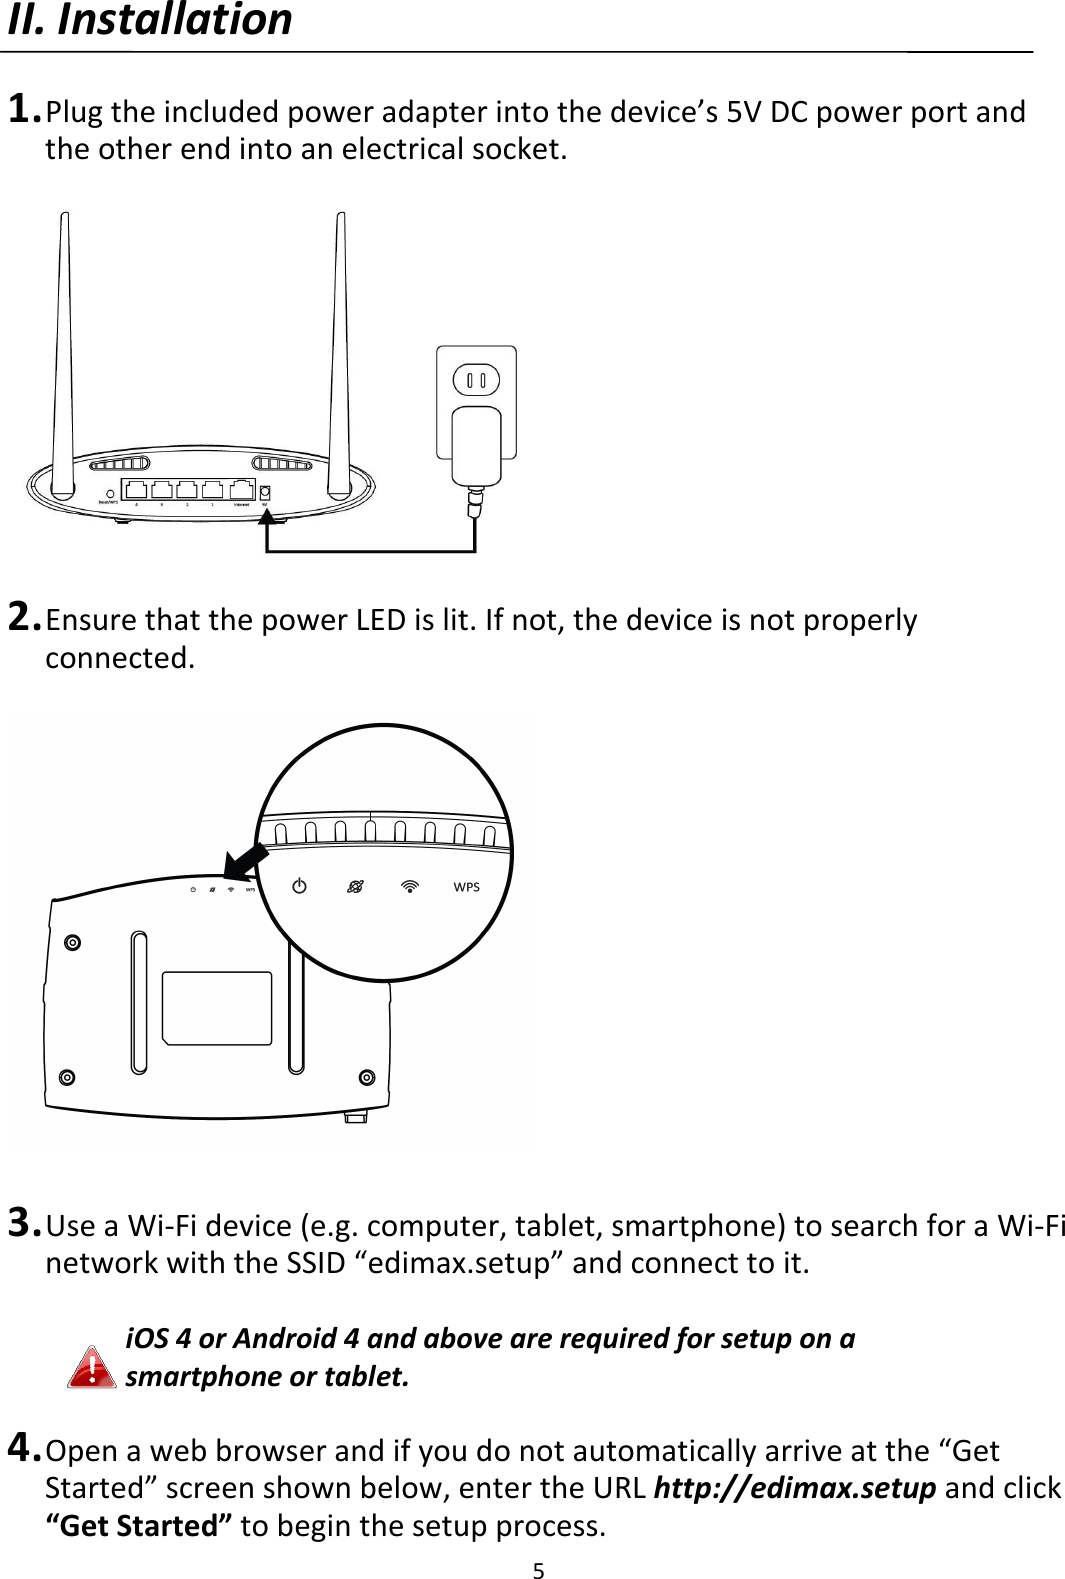 5 II. Installation  1. Plug the included power adapter into the device’s 5V DC power port and the other end into an electrical socket.    2. Ensure that the power LED is lit. If not, the device is not properly connected.    3. Use a Wi-Fi device (e.g. computer, tablet, smartphone) to search for a Wi-Fi network with the SSID “edimax.setup” and connect to it.  iOS 4 or Android 4 and above are required for setup on a smartphone or tablet.  4. Open a web browser and if you do not automatically arrive at the “Get Started” screen shown below, enter the URL http://edimax.setup and click “Get Started” to begin the setup process. 